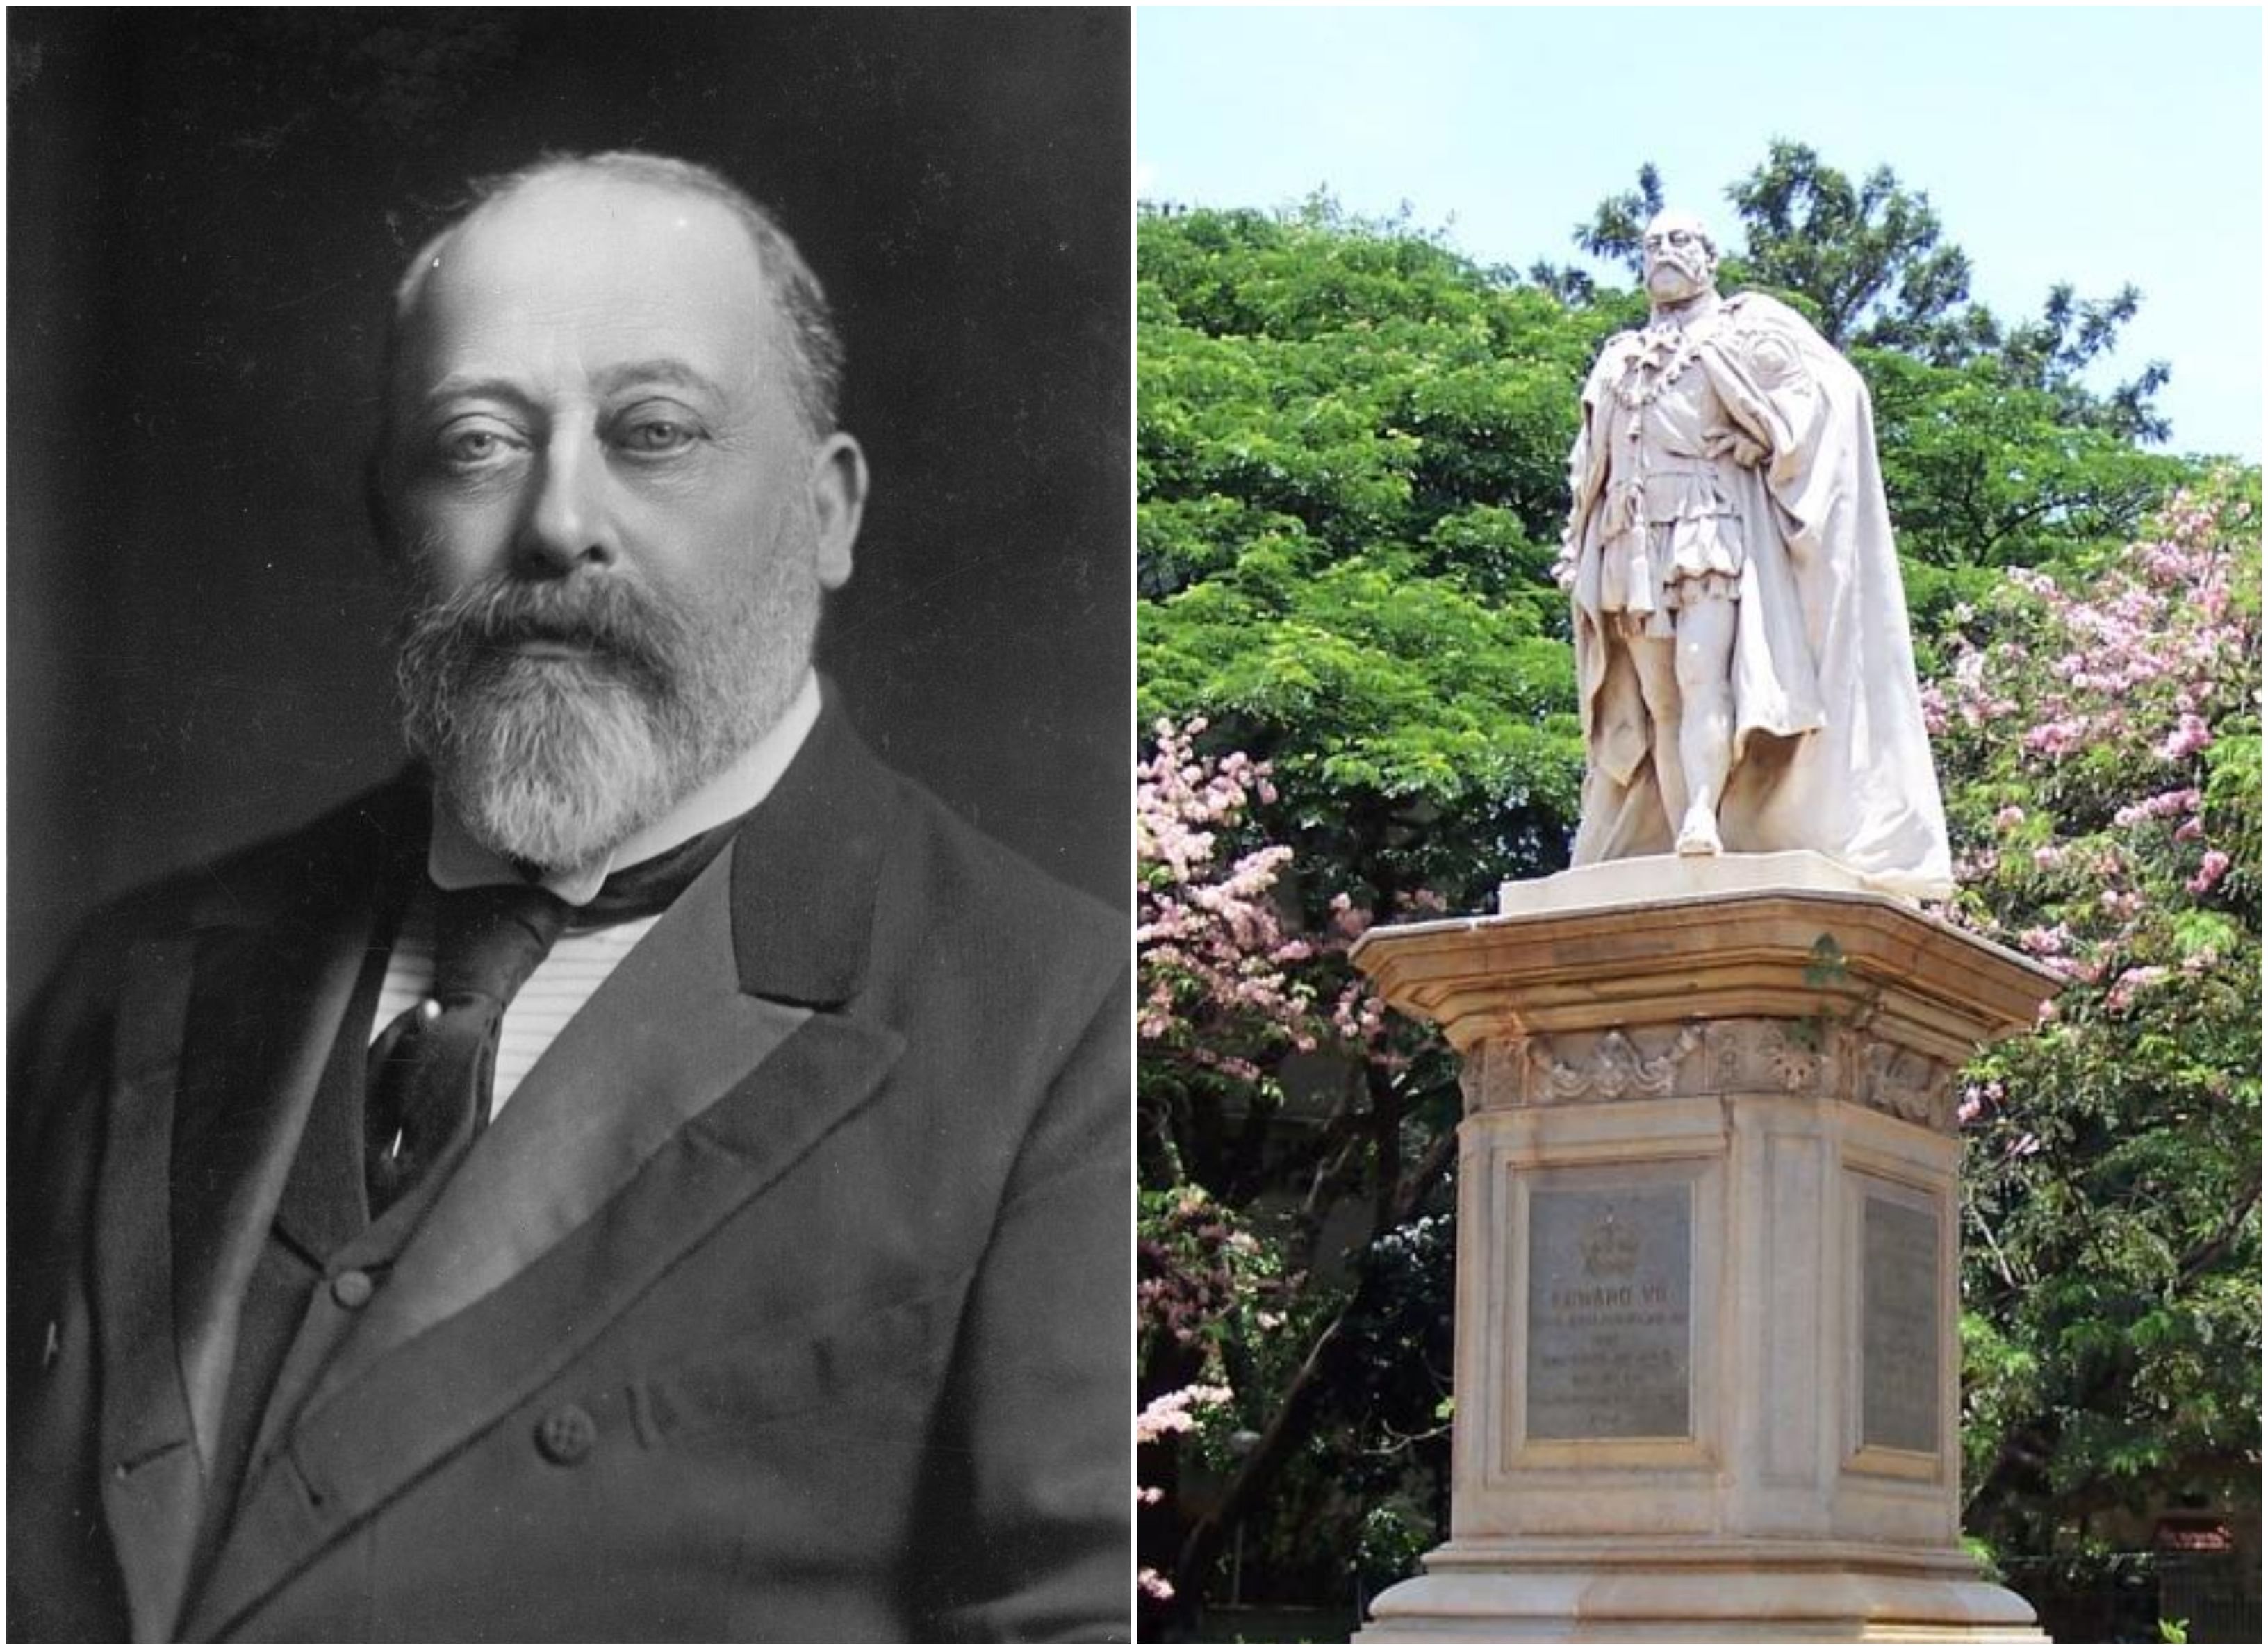 Some of Edward VII’s (L) nicknames were Bertie, Edward the Caresser and Uncle of Europe. The statue of King Edward VII in Cubbon Park. (R)